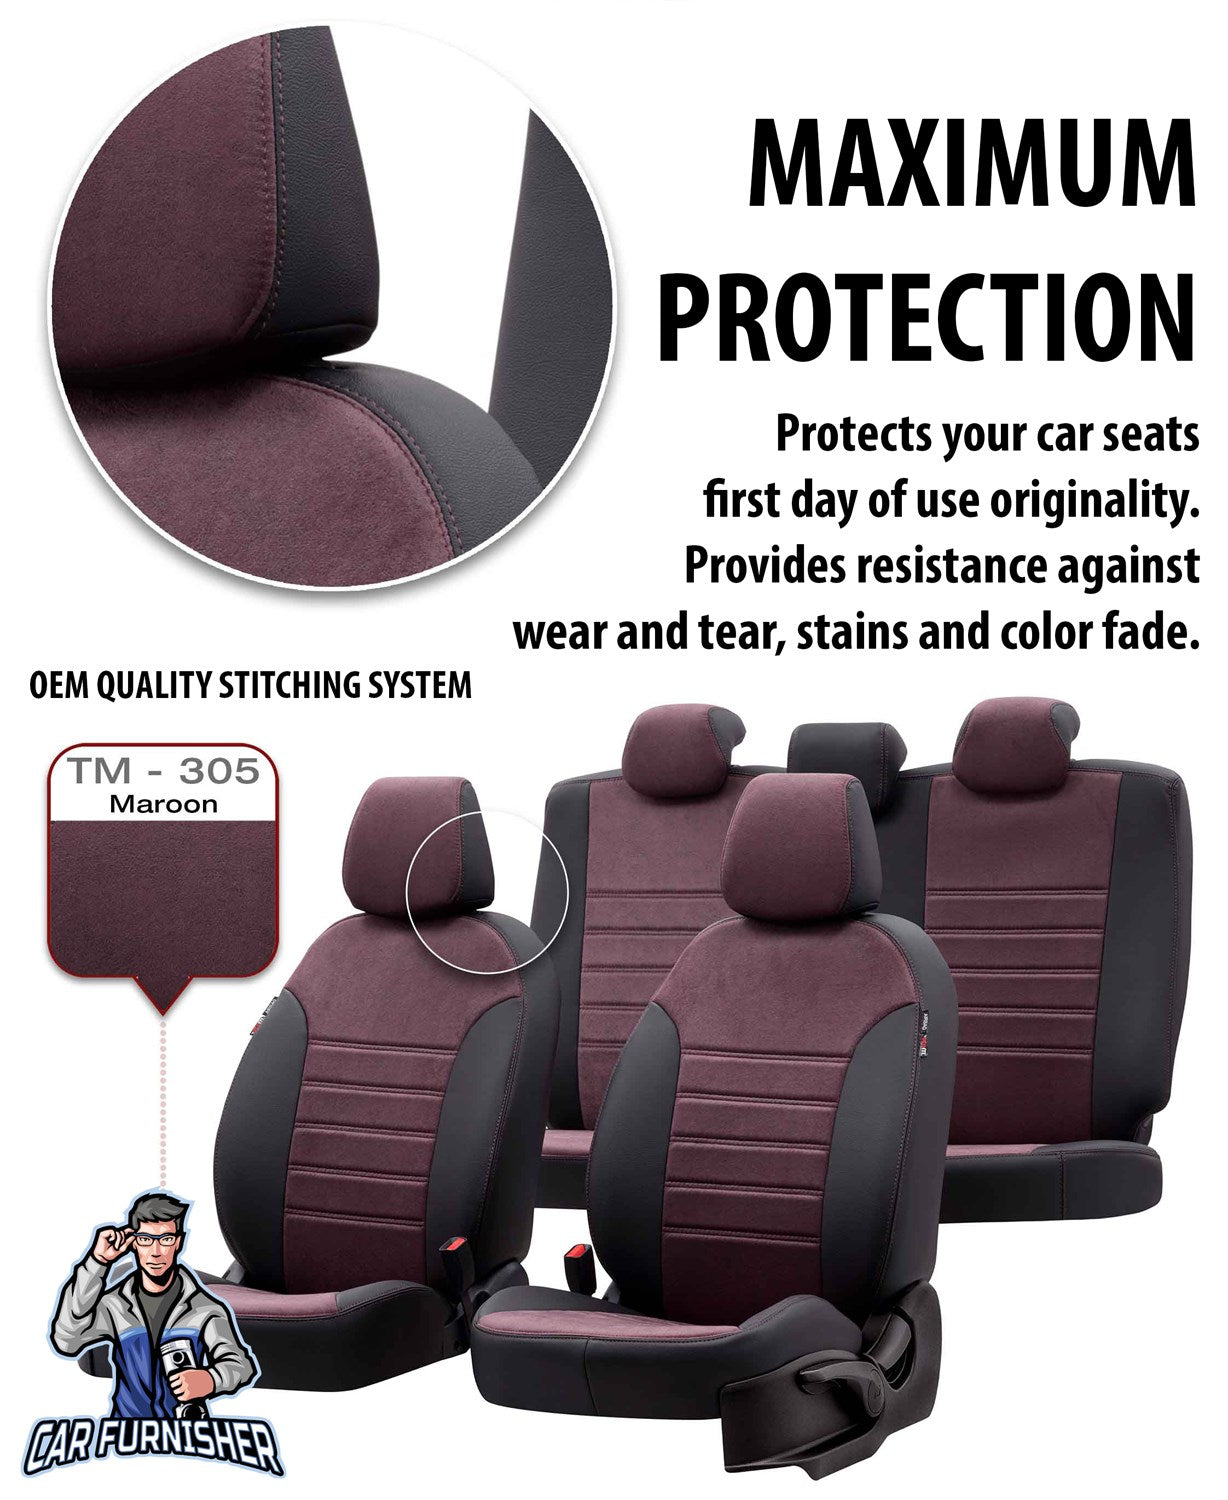 Hyundai Getz Seat Covers Milano Suede Design Burgundy Leather & Suede Fabric